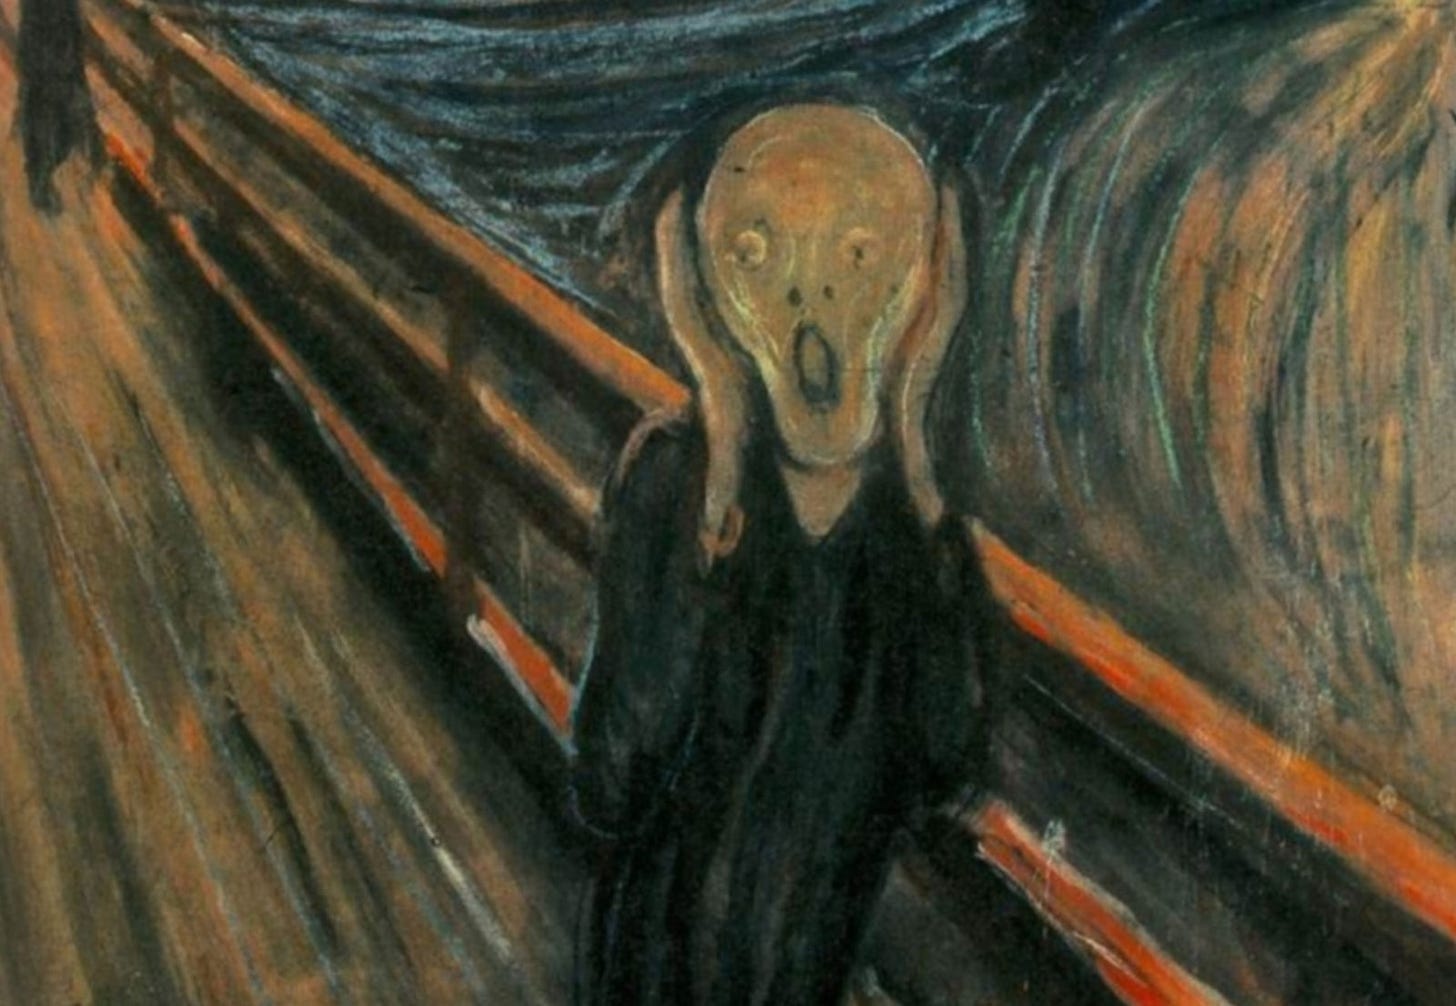 The Mysterious Motives Behind the Theft of 'The Scream' | Smart News|  Smithsonian Magazine